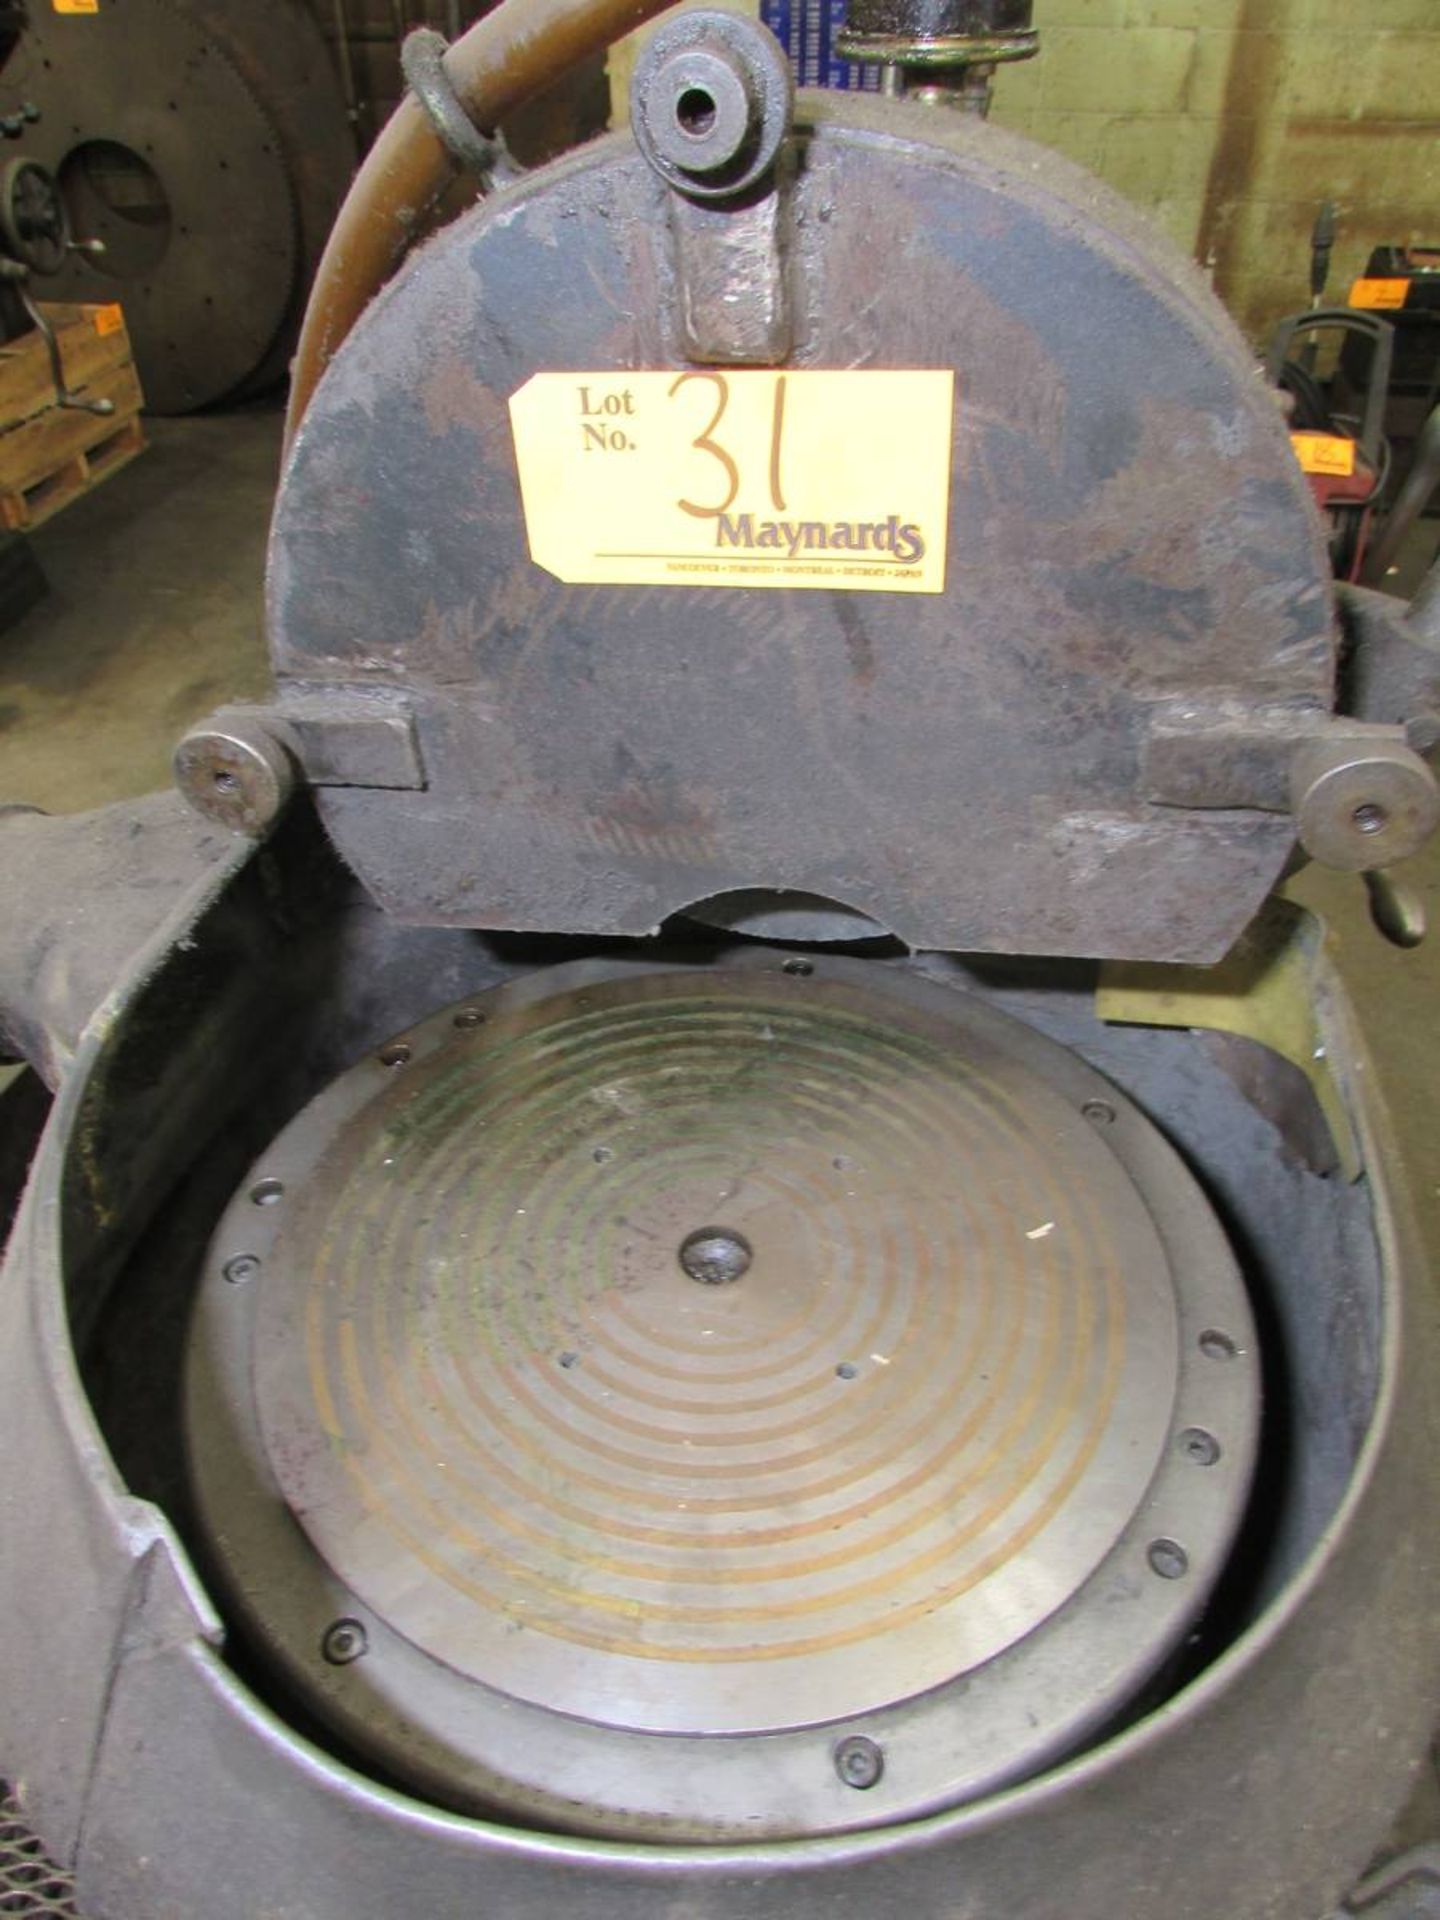 Heald Machine Co No. 22 12" Rotary Surface Grinder - Image 3 of 8